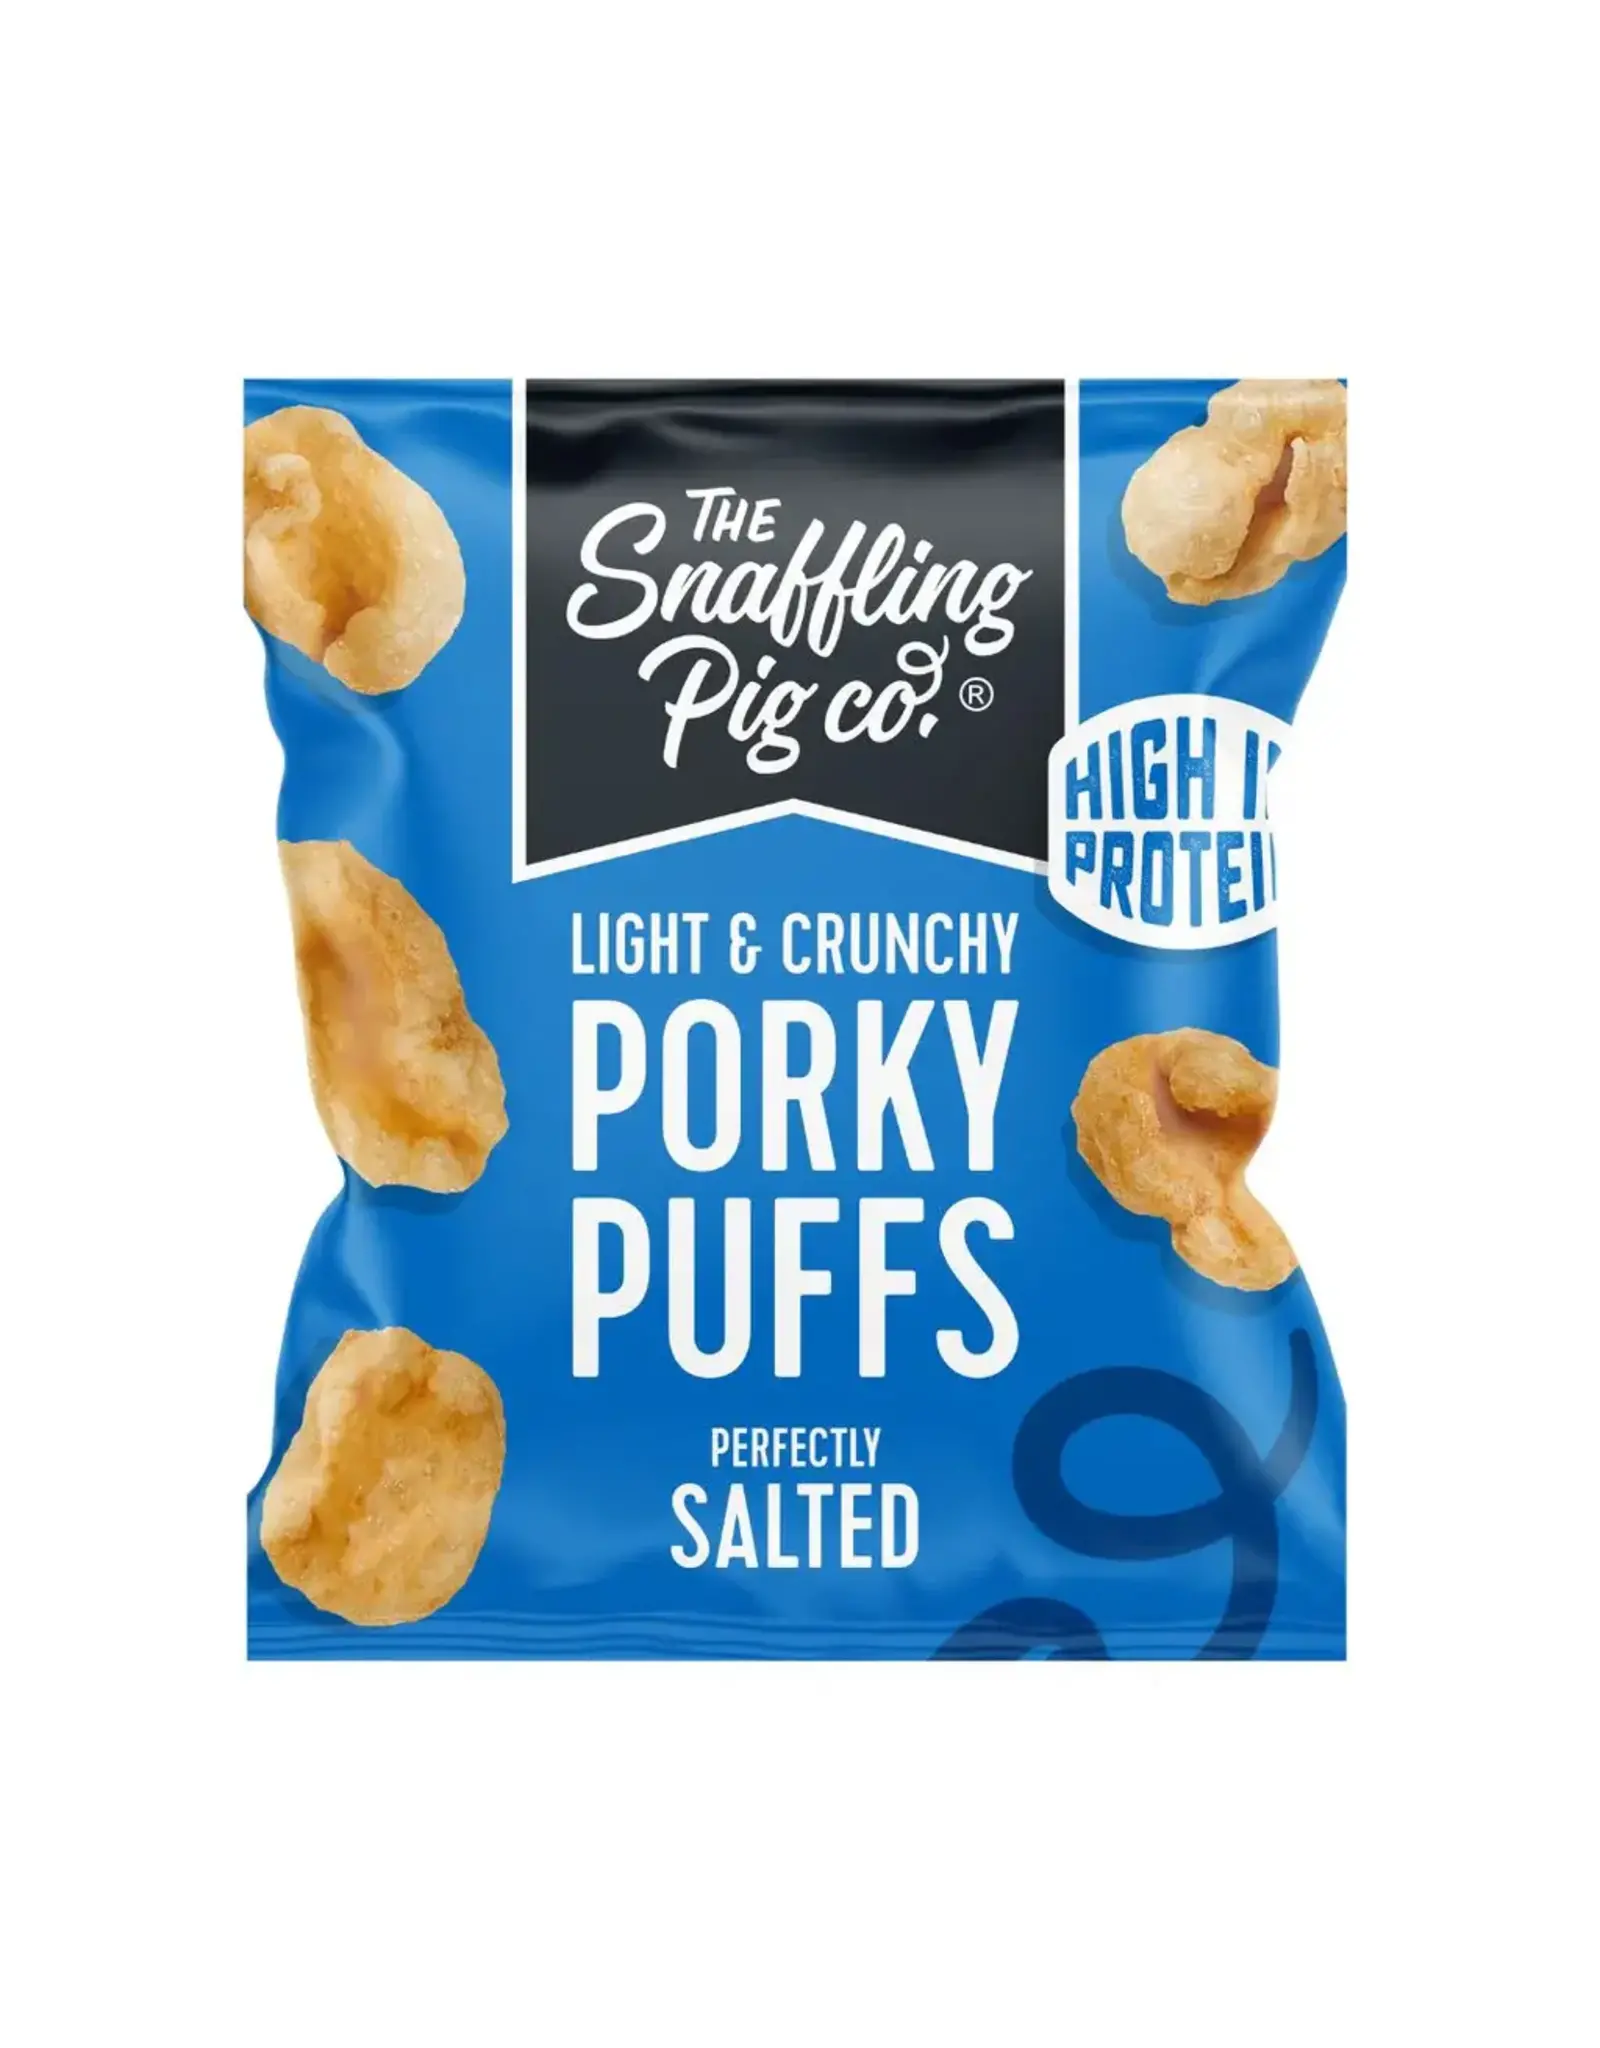 The Snaffling Pig Co Porky Puffs Perfectly Salted 20g (British)